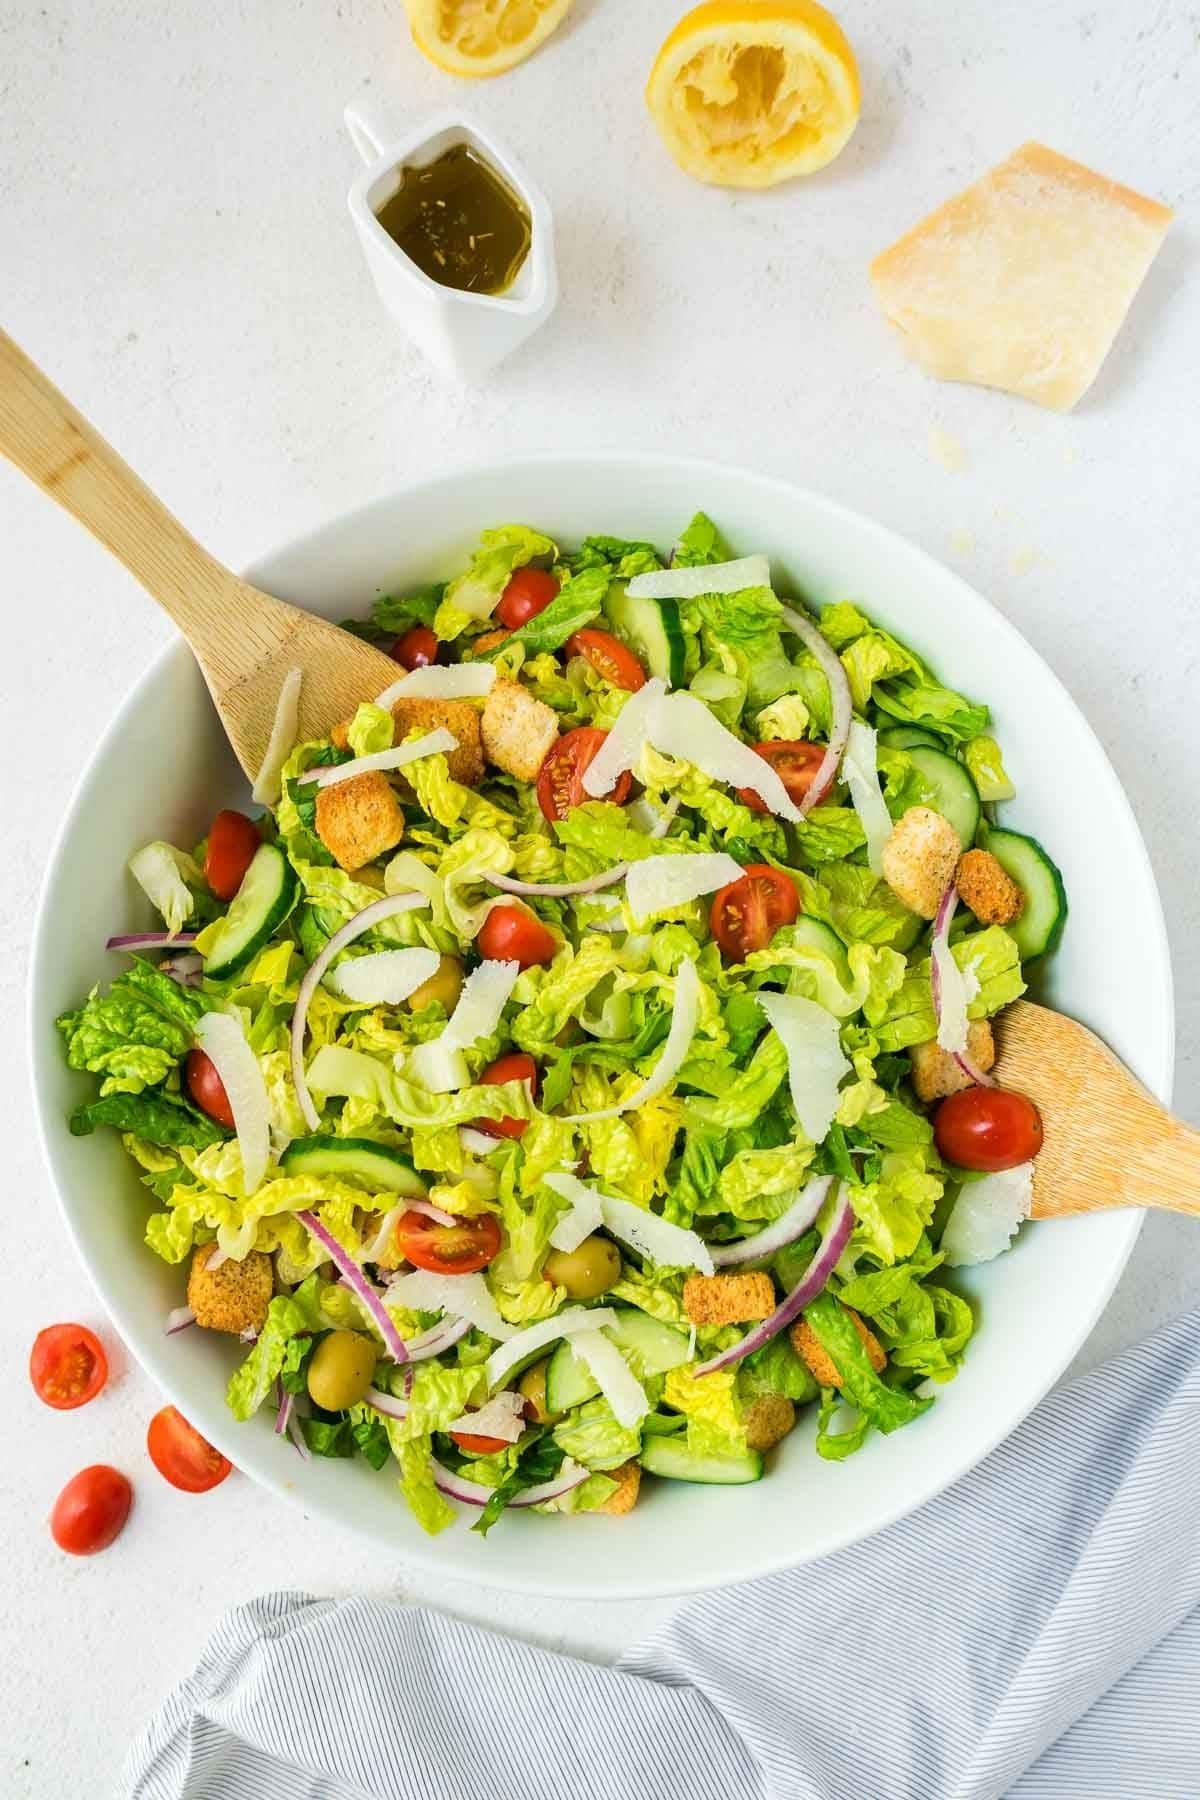 A tossed green salad in a large white bowl with two wooden serving spoons.